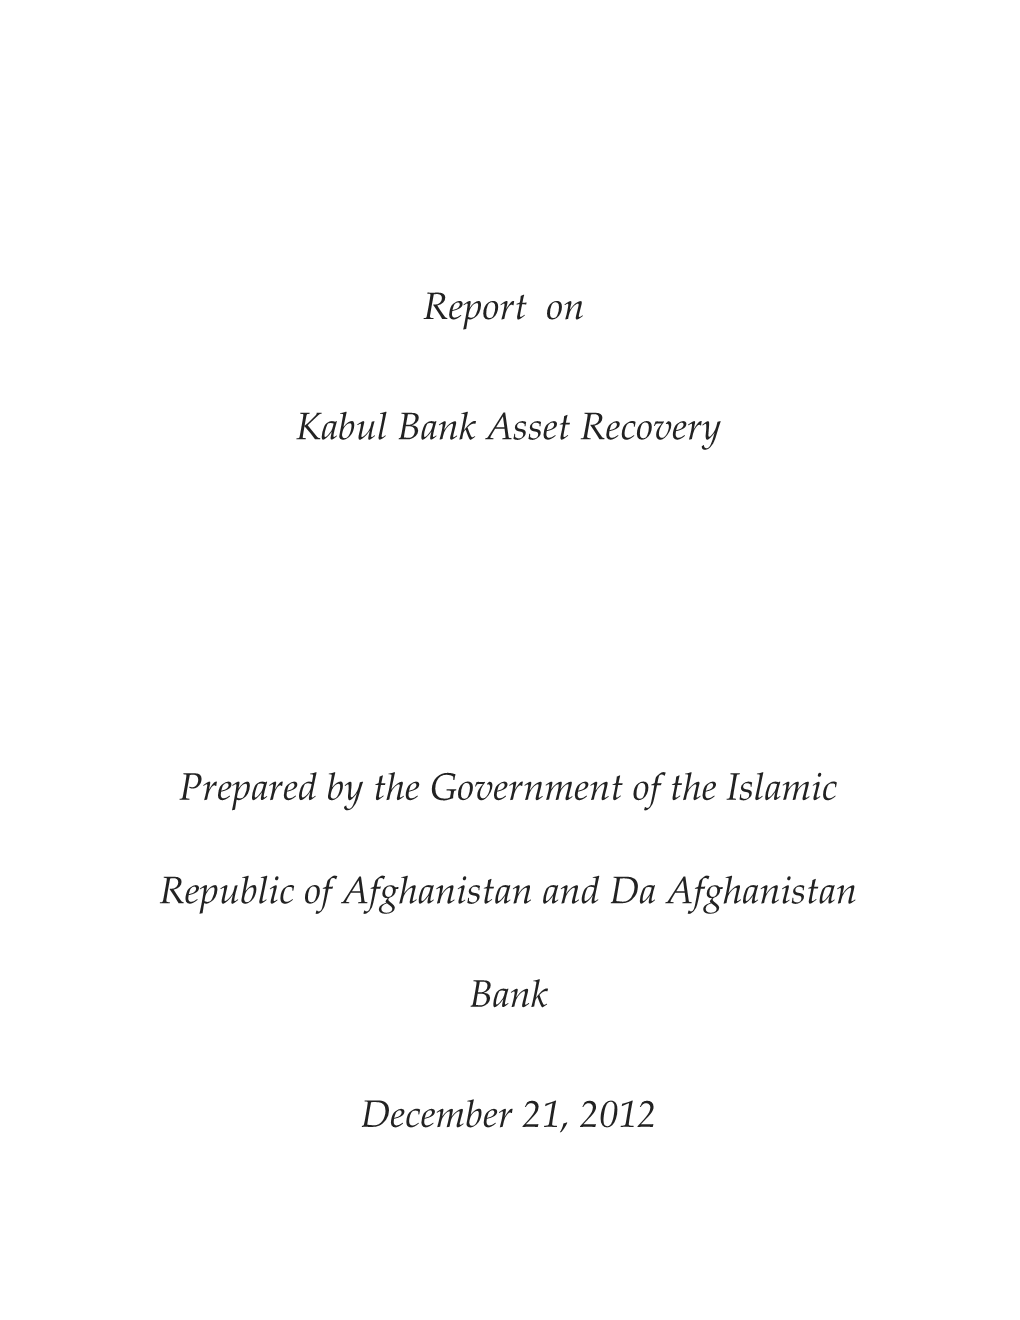 Introduction President Karzai S April 4, 2012 Decree Gave Shareholders and Related Parties